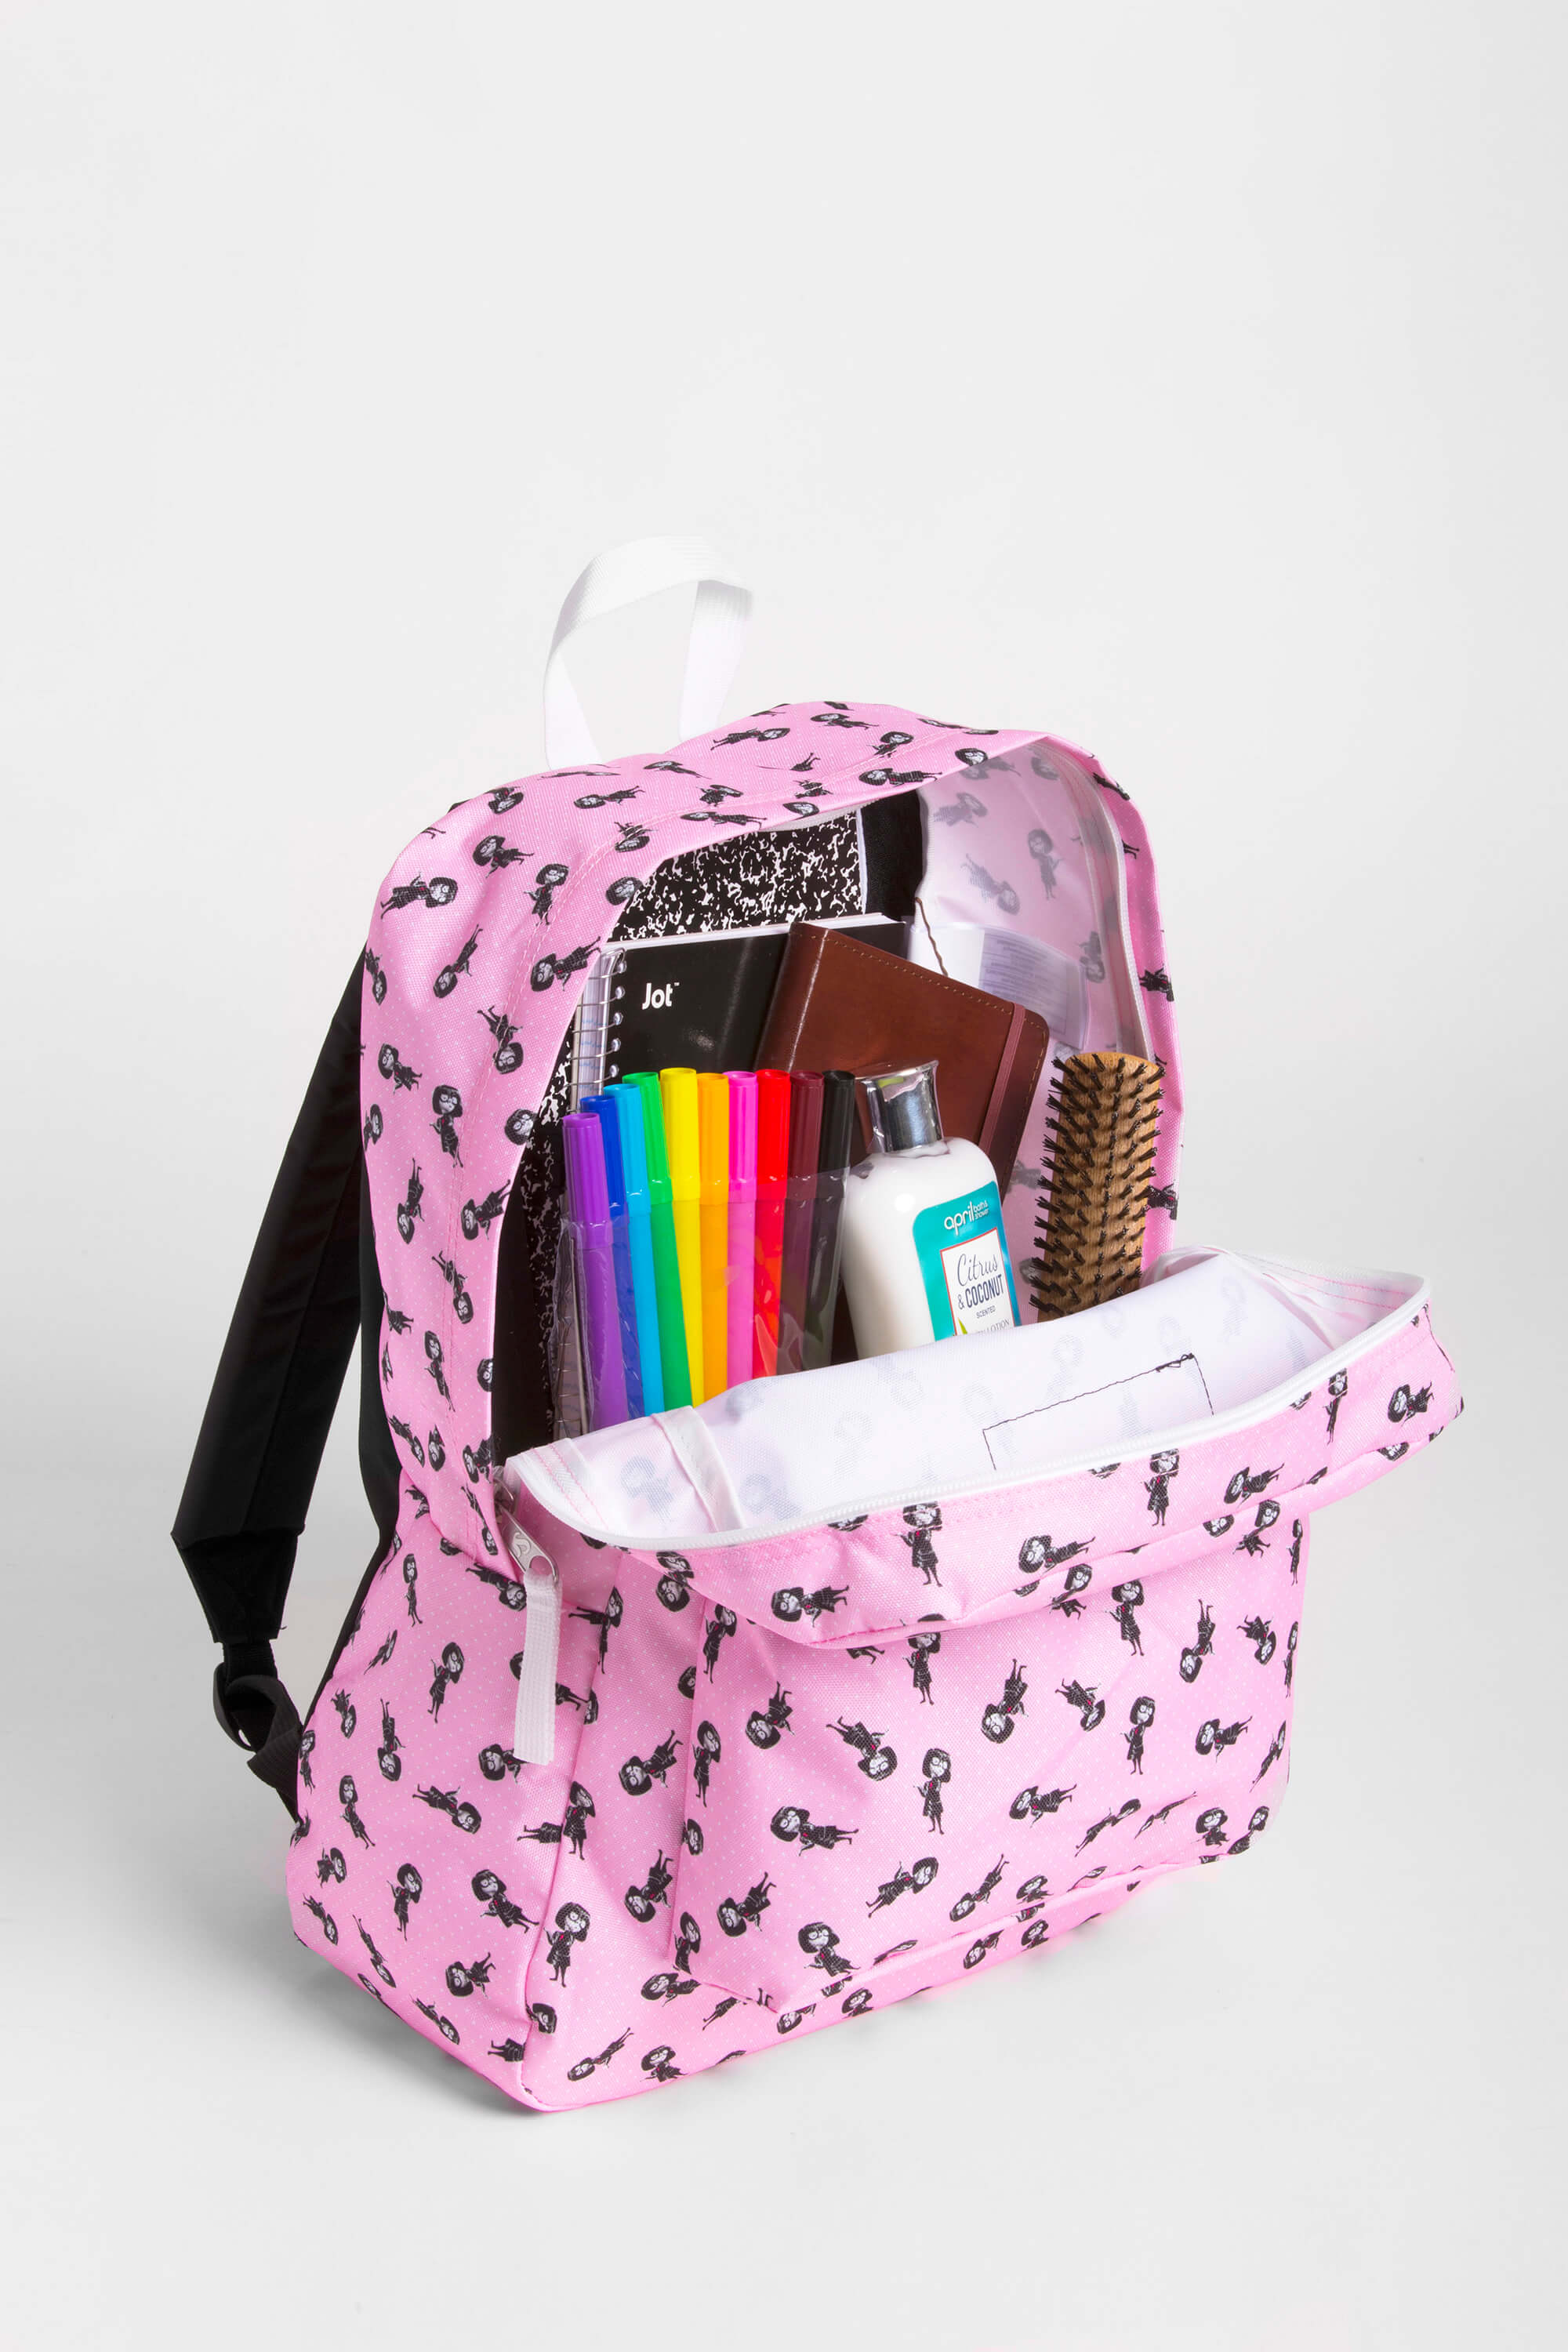 Cool Backpacks For Middle Schoolers